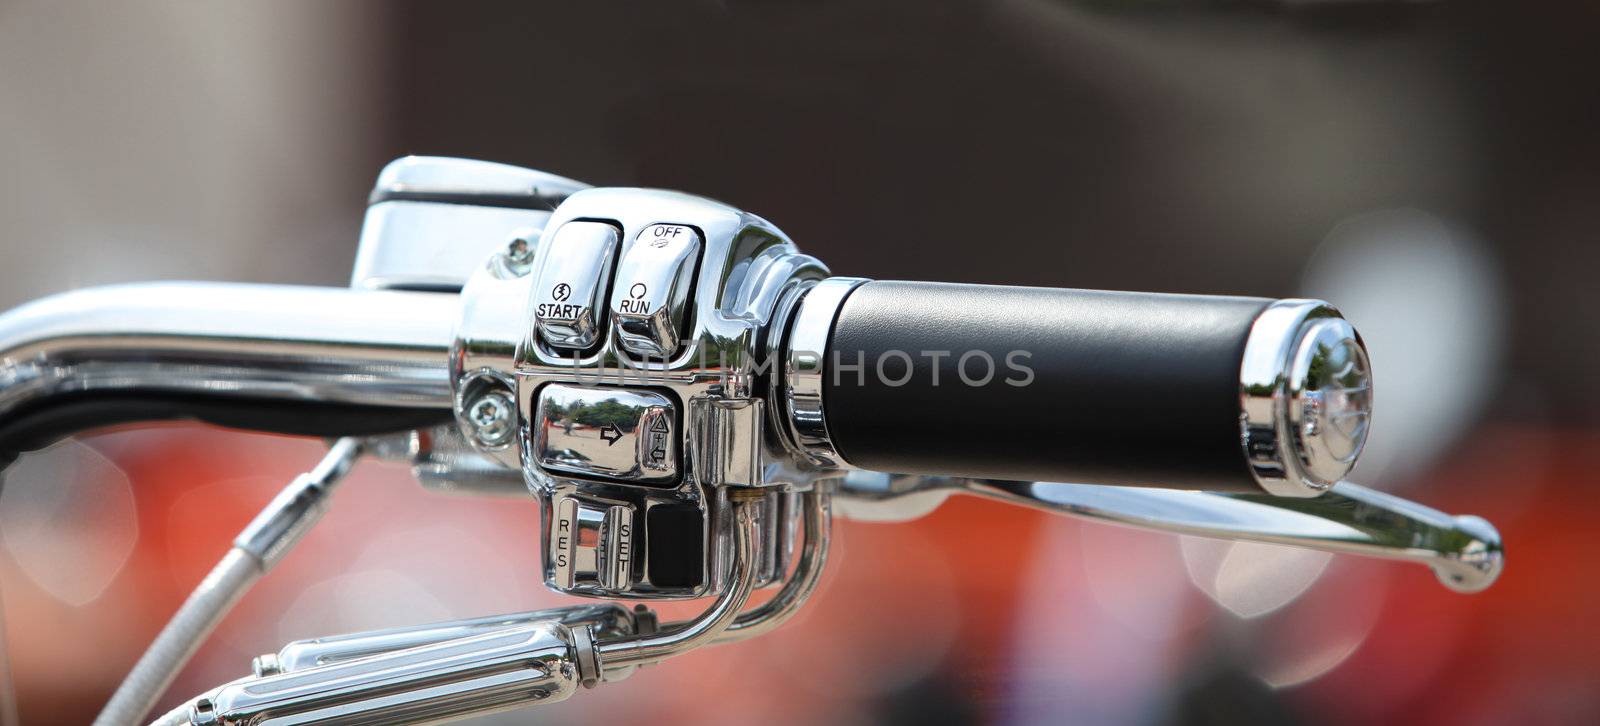 Steering wheel motorcycle throttle control lever close up